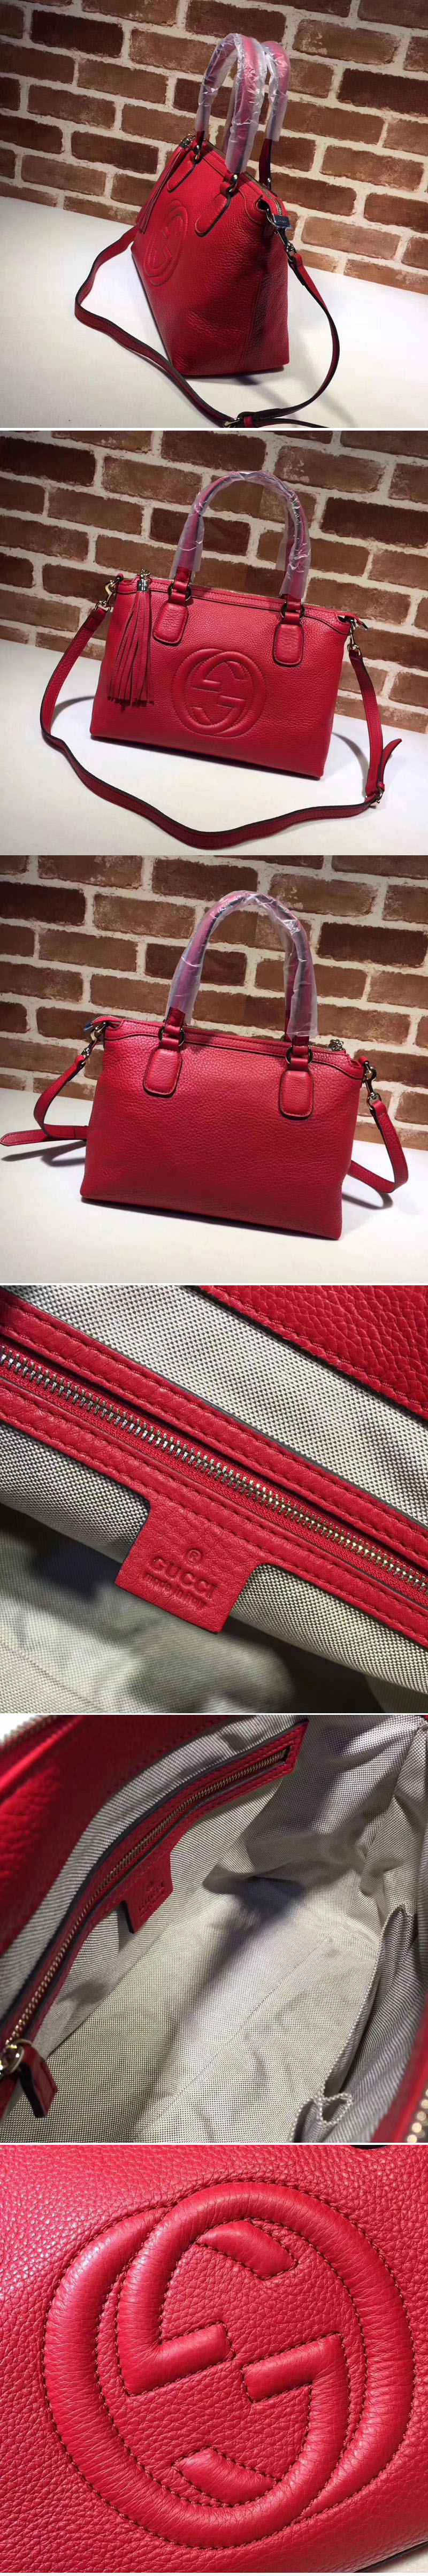 Replica Gucci 308362 Calf Leather Soho Top Handle Bags Red